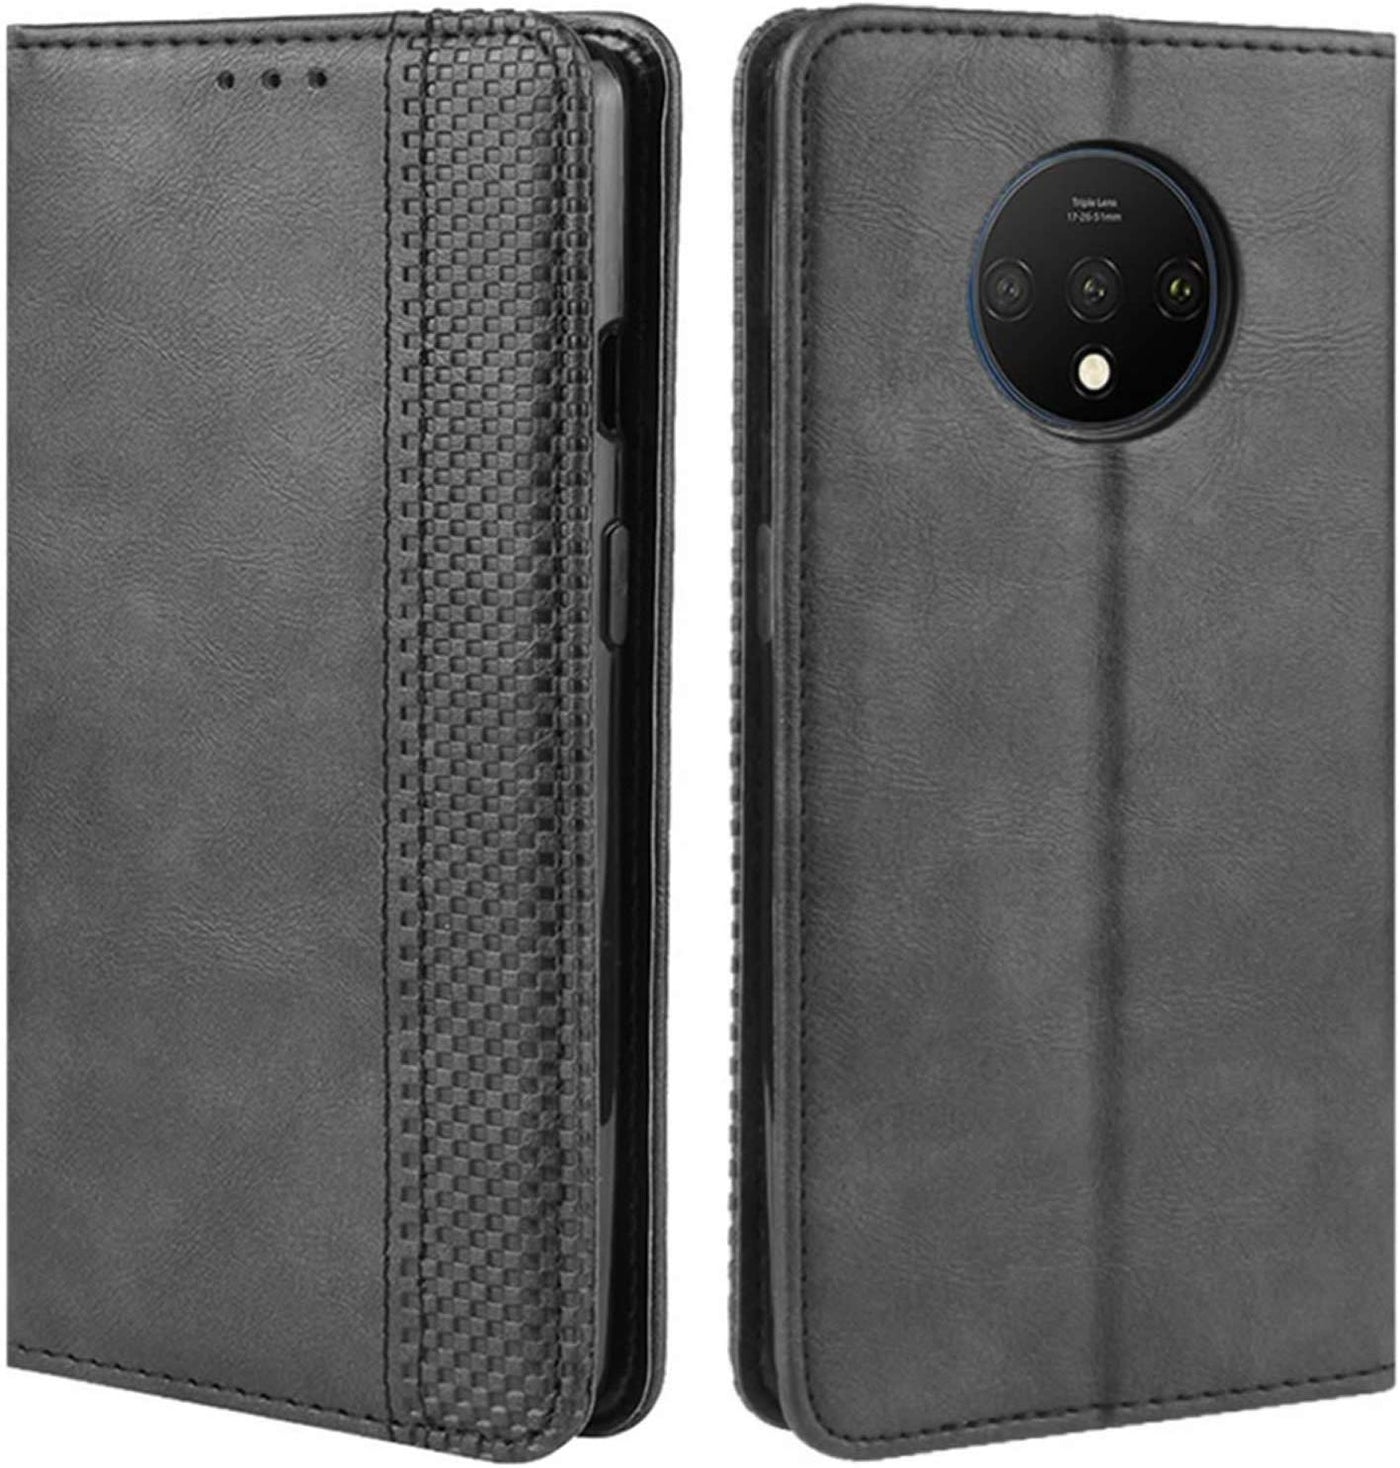 Oneplus 7T black color leather wallet flip cover case By excelsior